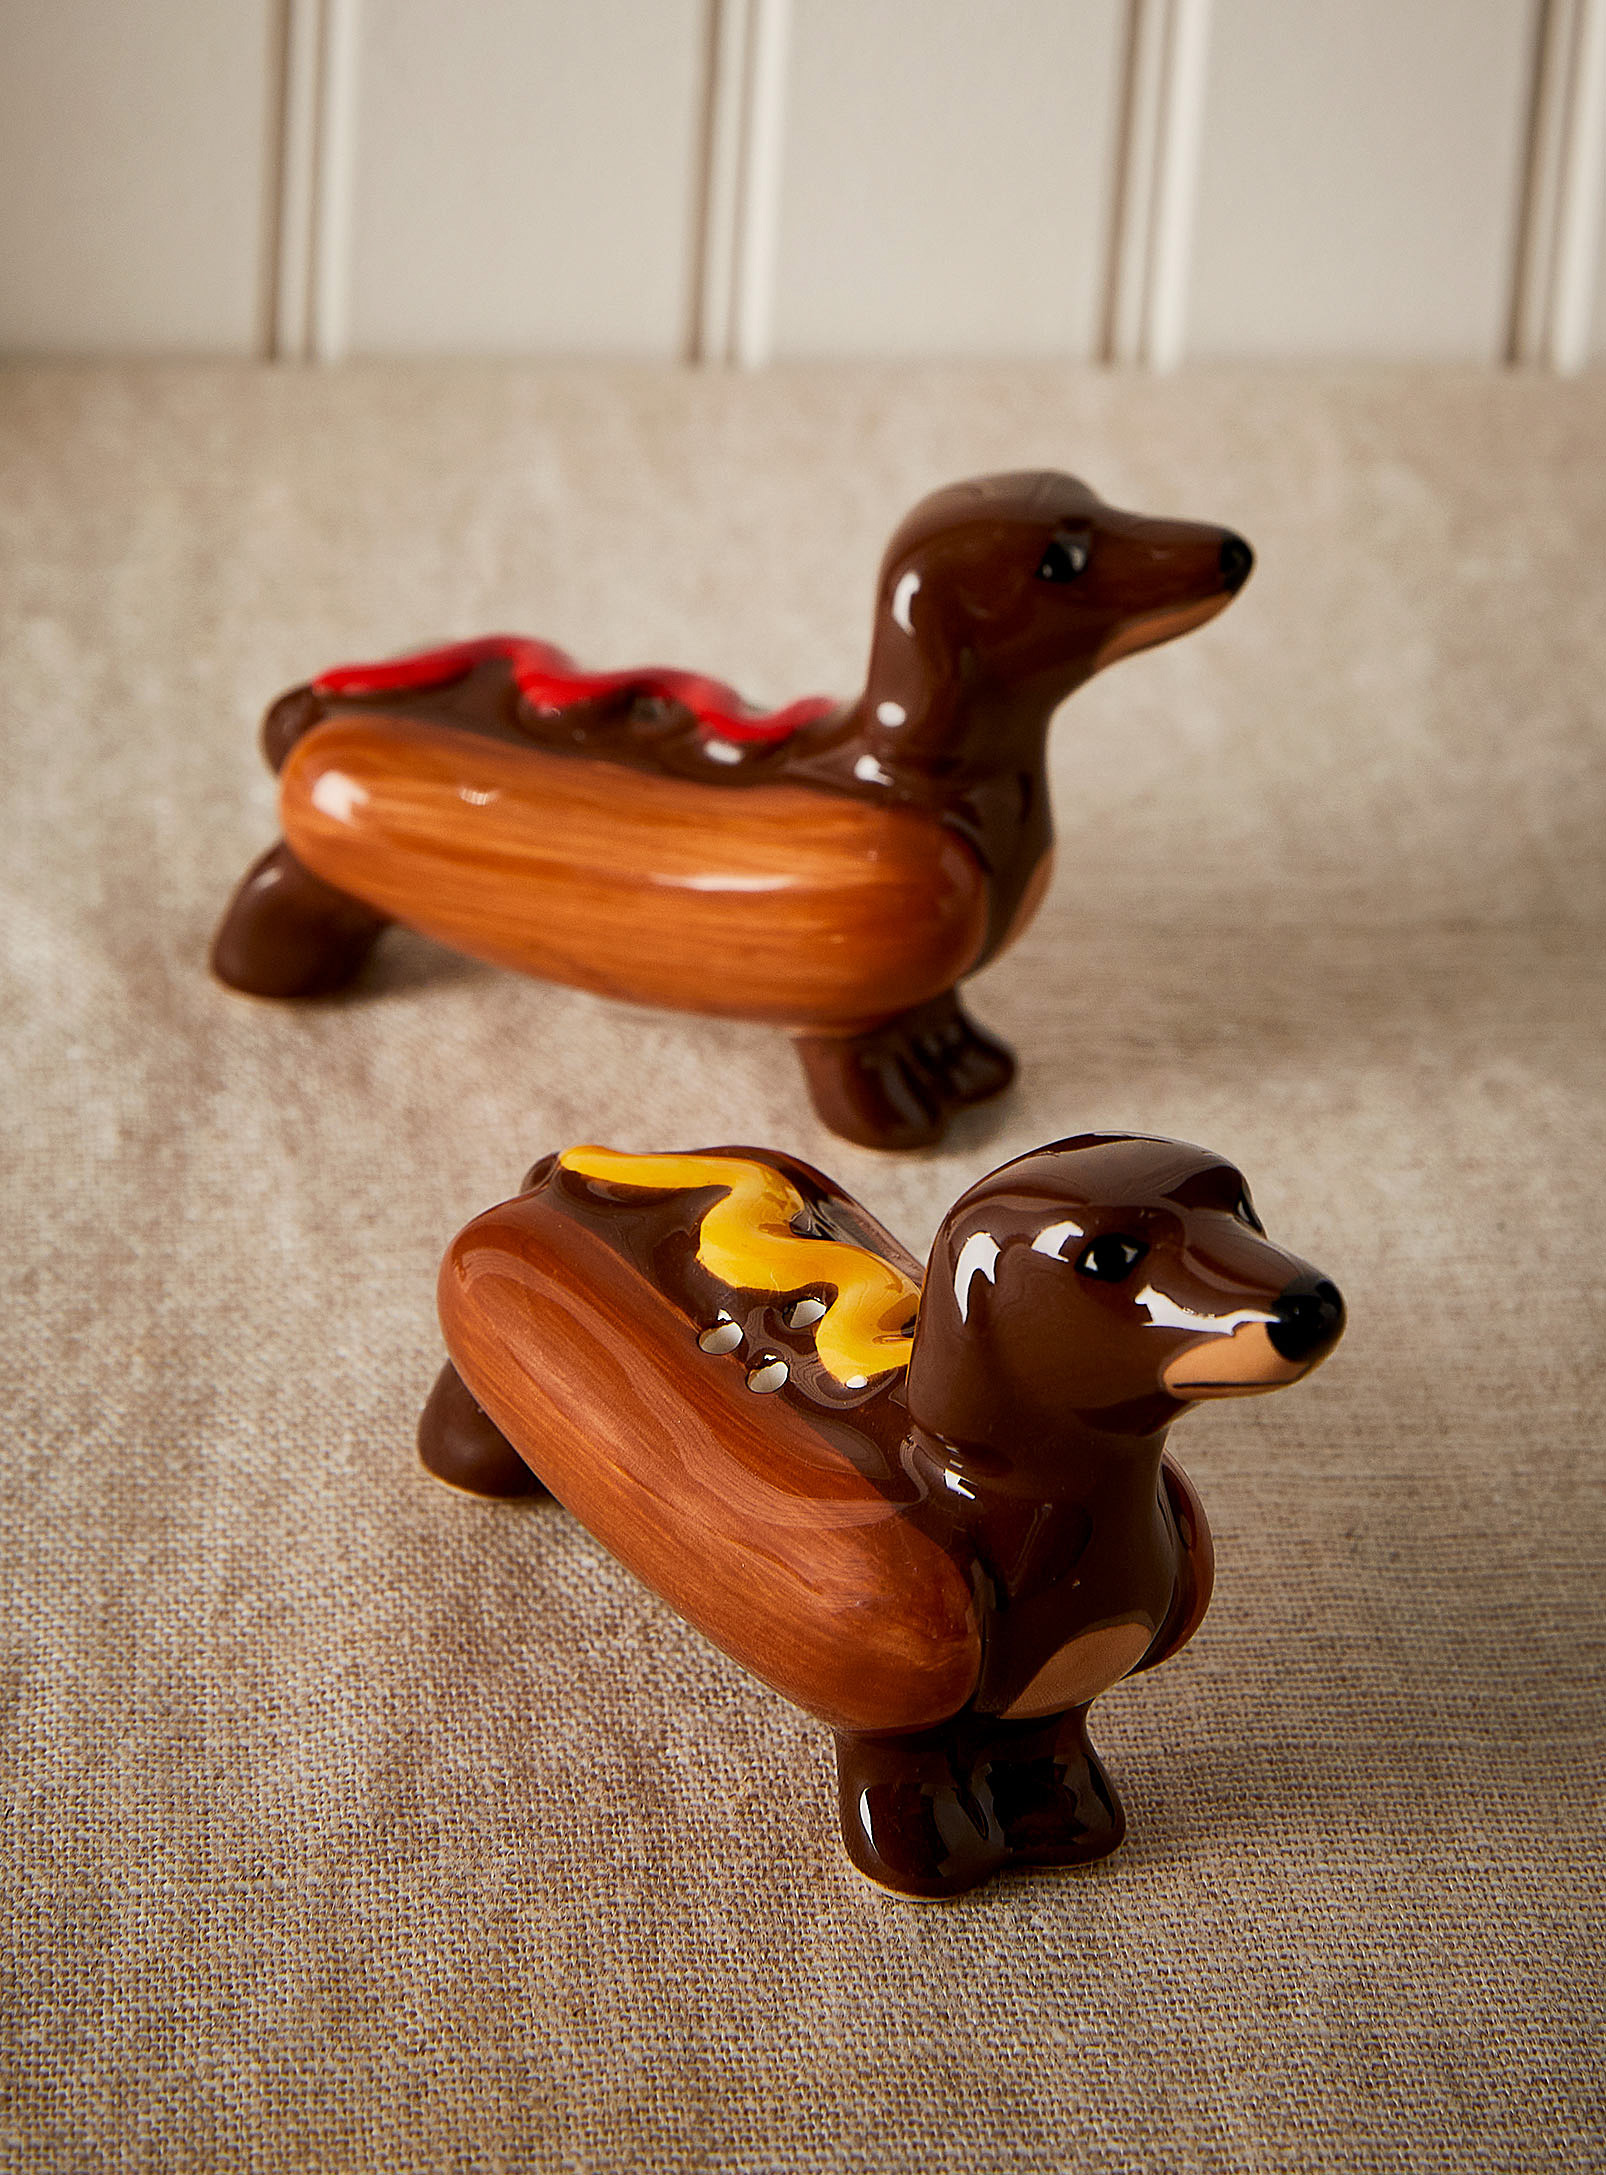 Simons Maison Sausage Dogs Salt And Pepper Shaker Set In Assorted